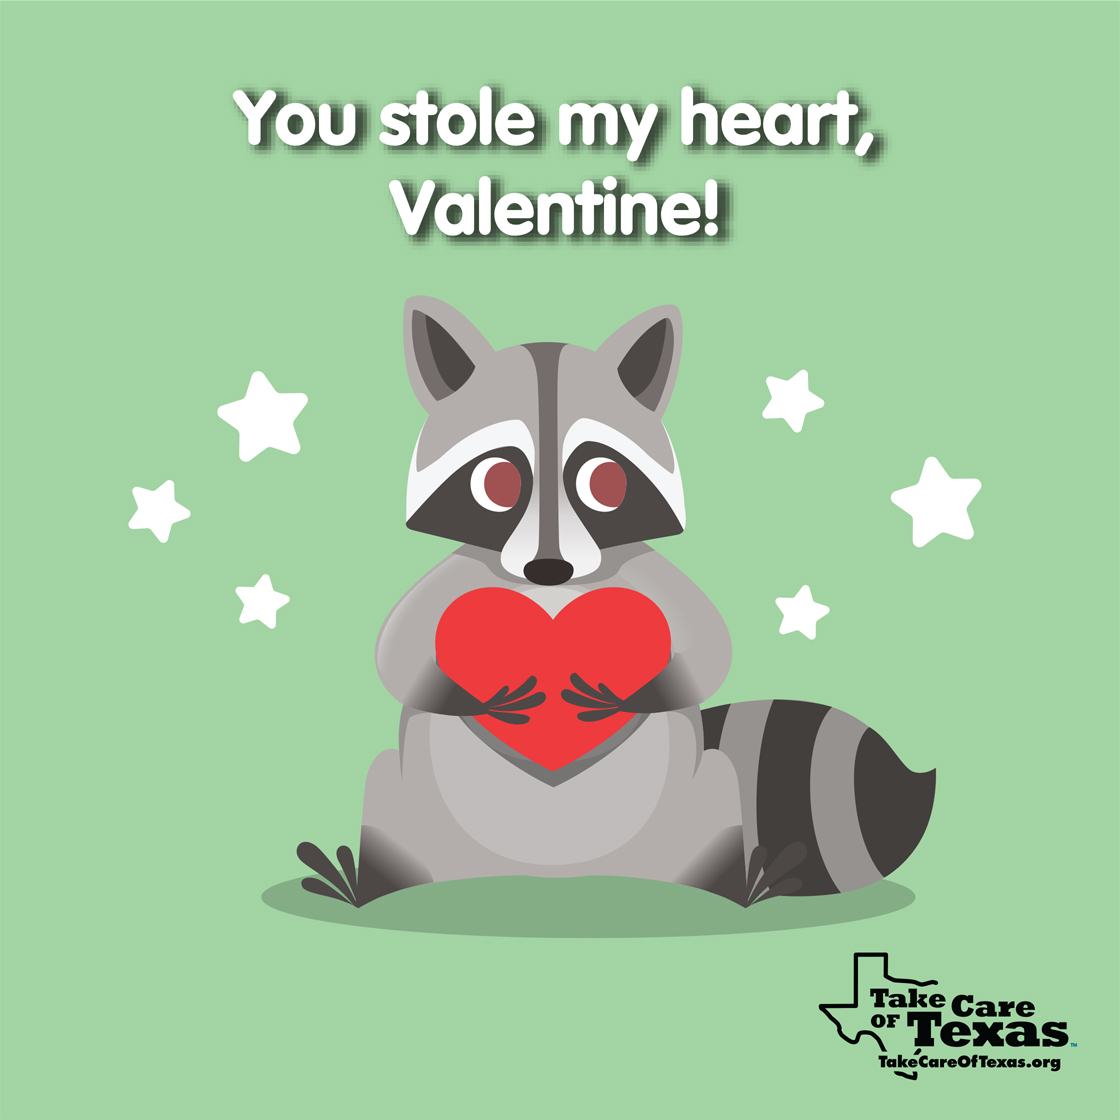 Raccoon with the text "You stole my heart, Valentine!"